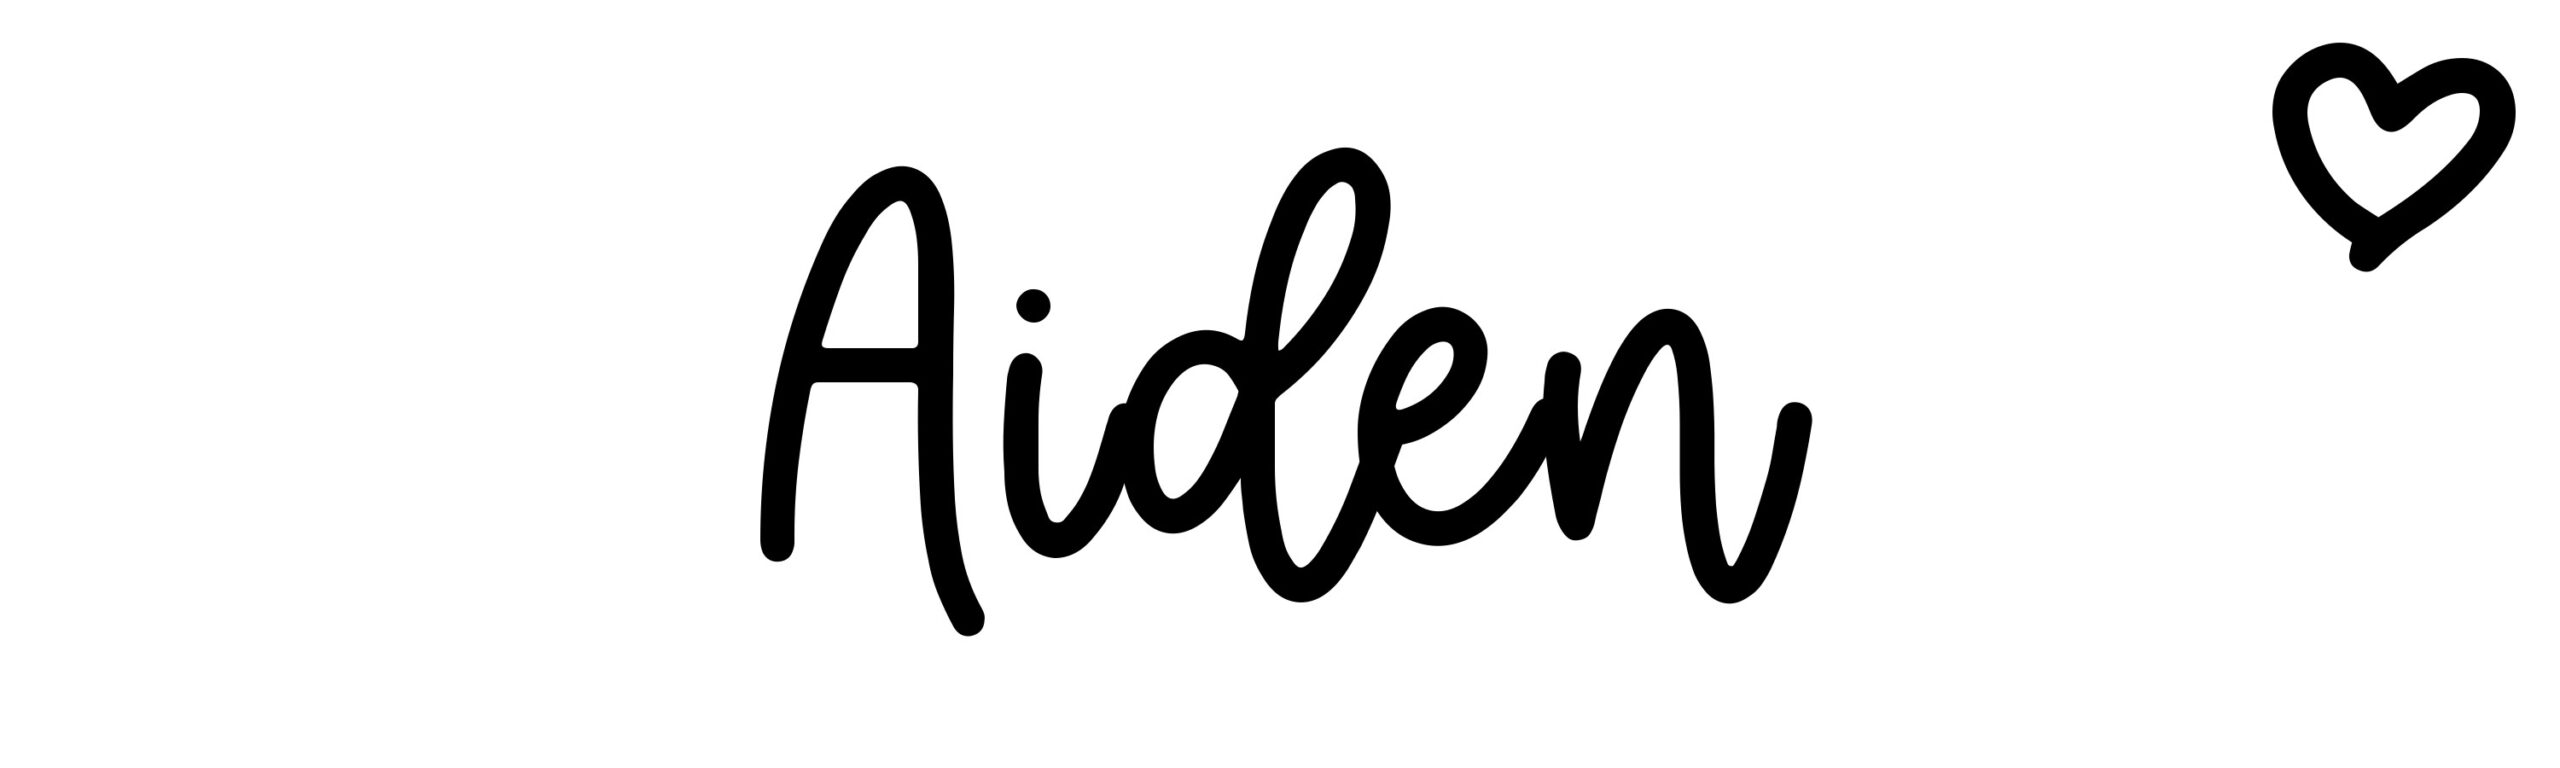 Aiden - Name meaning, origin, variations and more